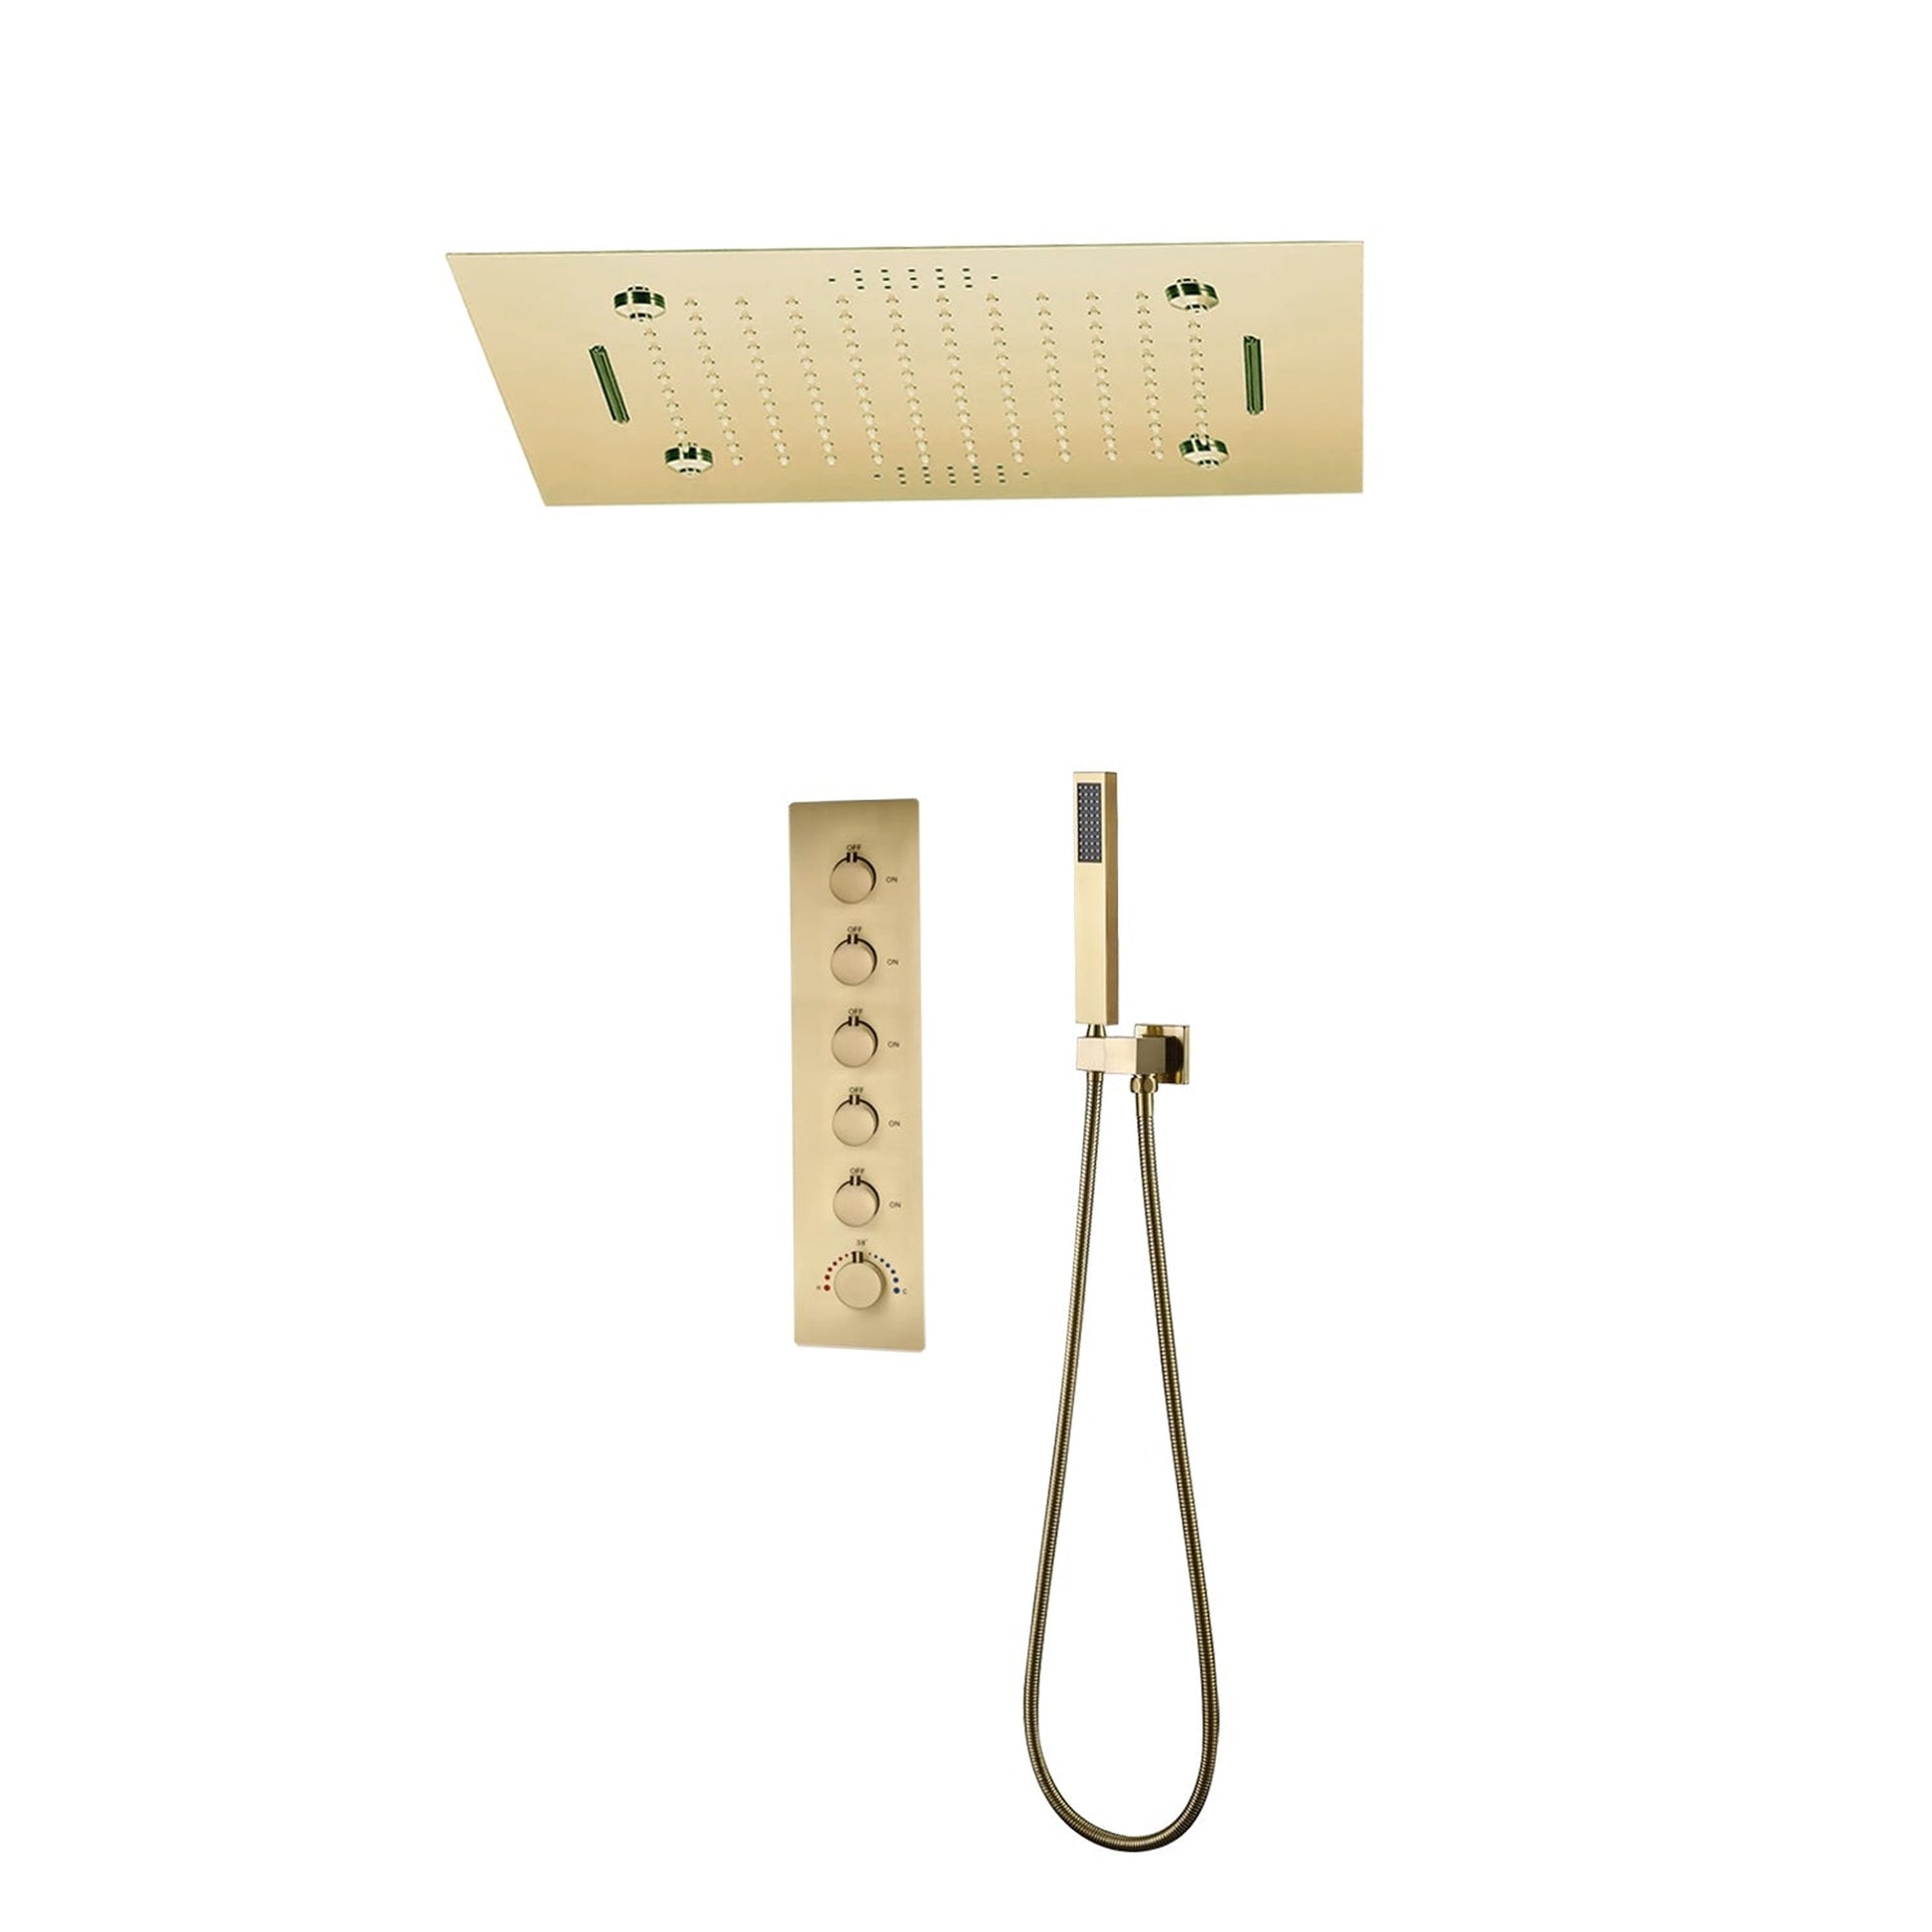 Fontana Fondi Brushed Gold Recessed Ceiling Mounted Remote Controlled Thermostatic LED Waterfall Rainfall Musical Shower System With Hand Shower